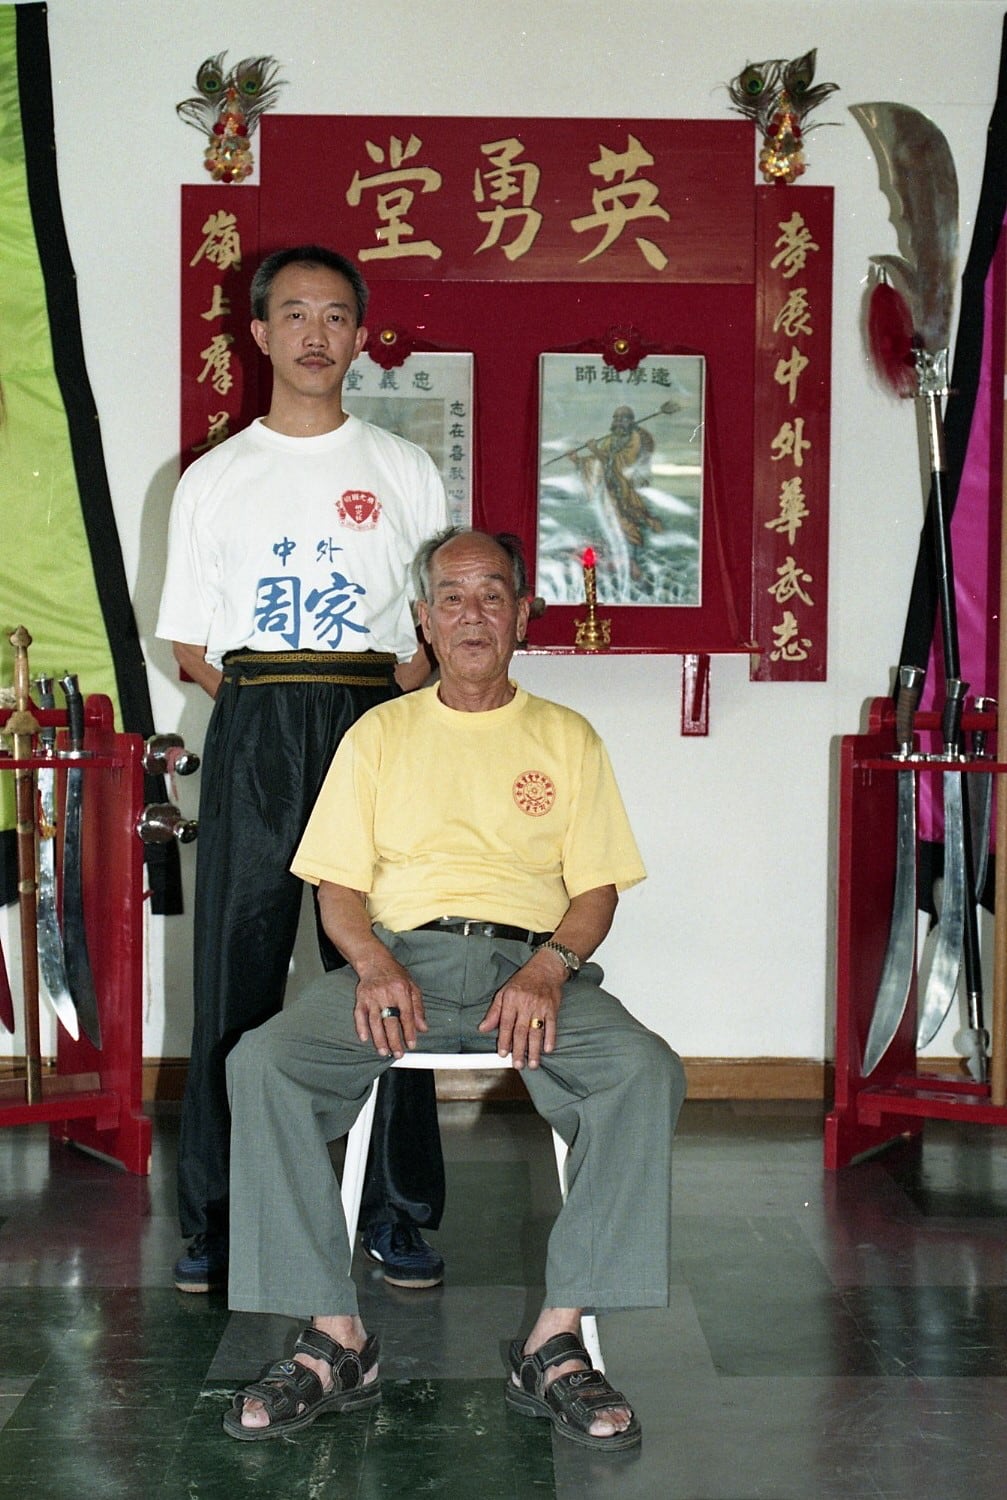 A photo with Master Zhou Jinbo and Master Seet Chor Thong in the Siegen Ying Yong Tang School.